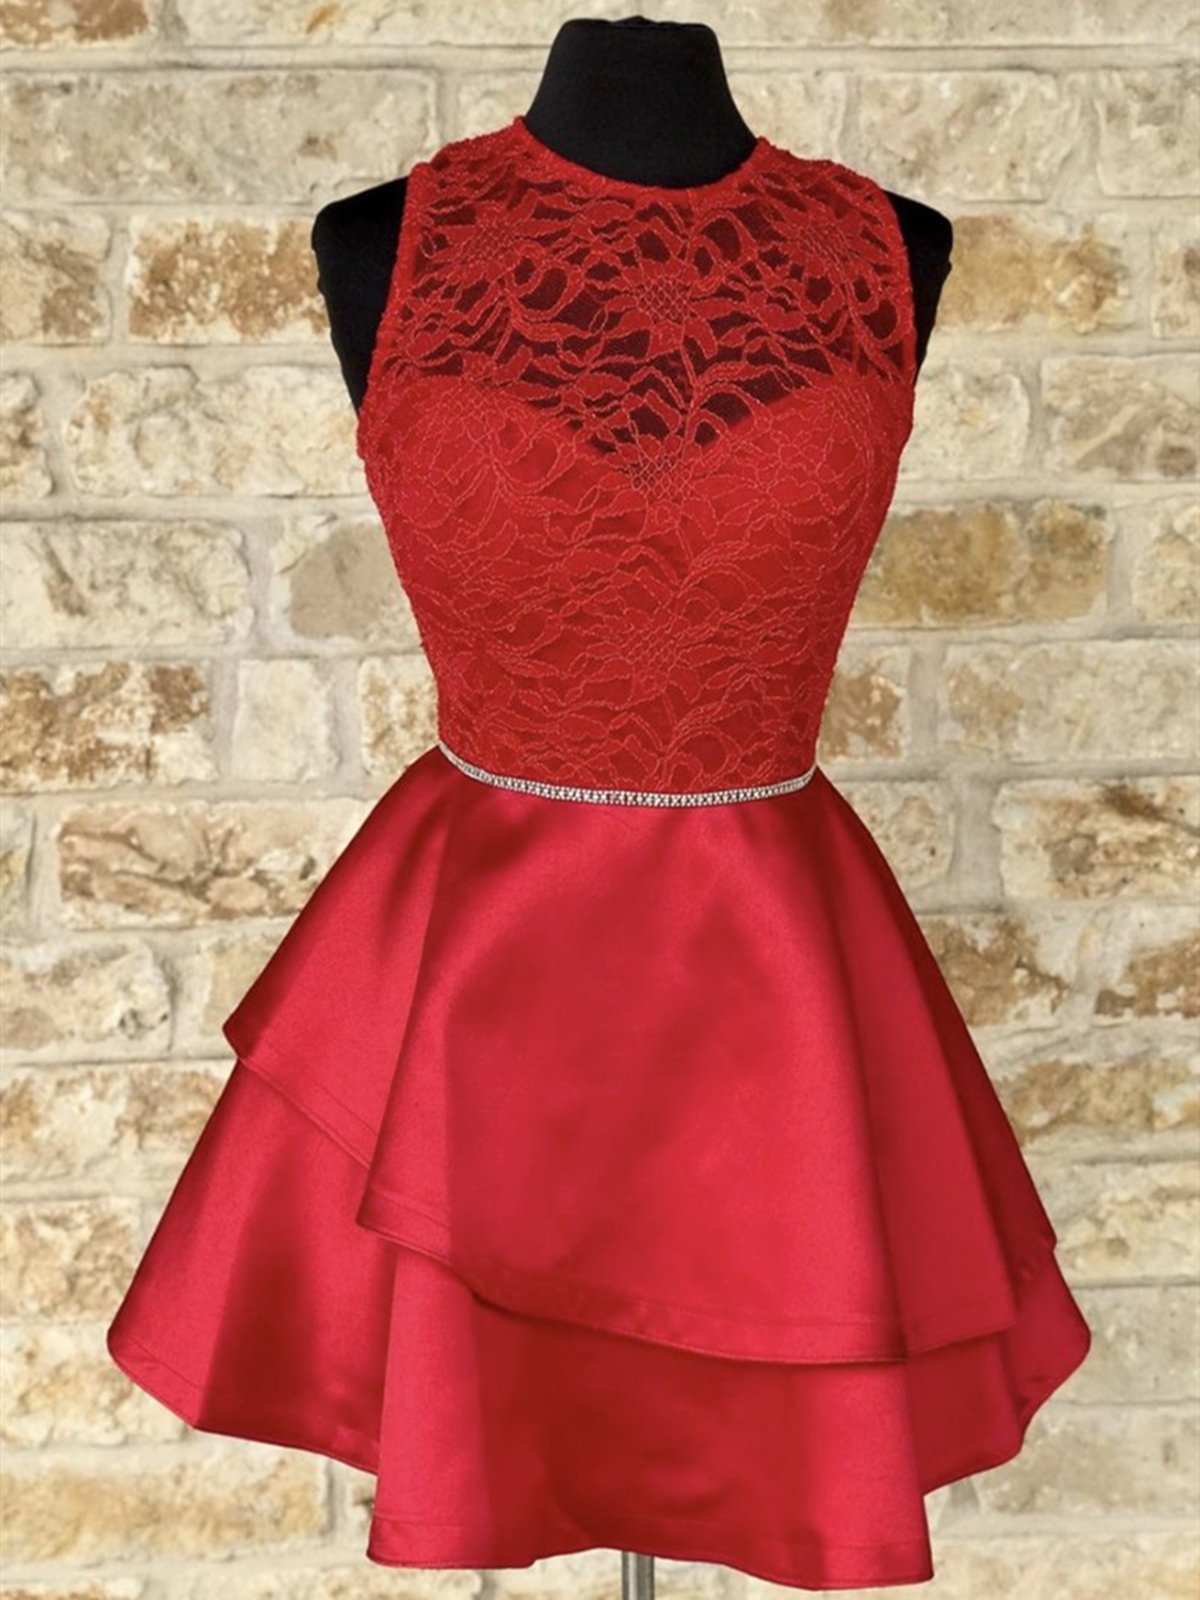 Party Dress Dress Code, Short Red Lace Prom Dresses, Short Red Lace Formal Homecoming Dresses